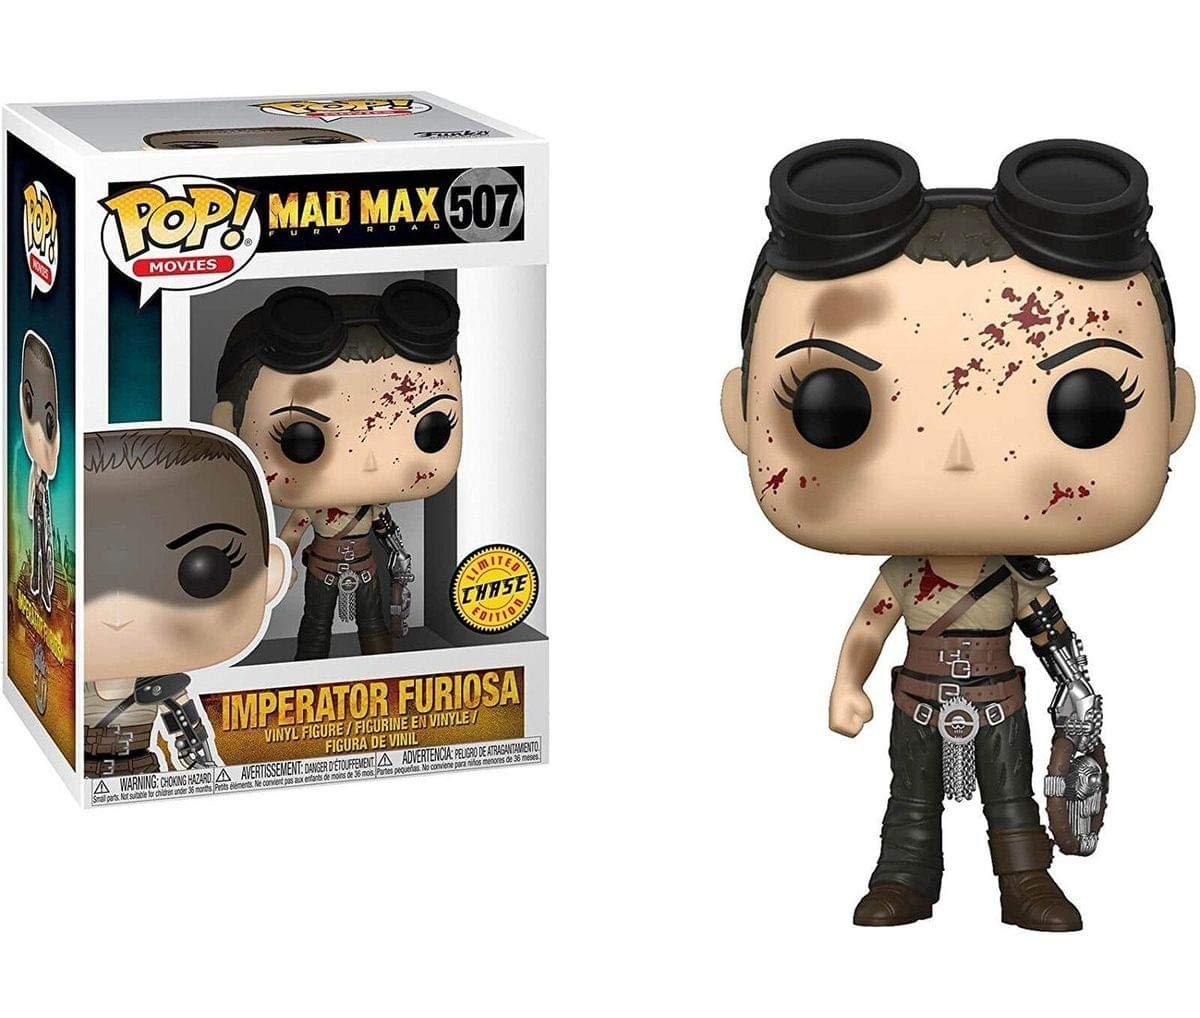 Funko POP! Movies: Mad Max Fury Road CHASE Furiosa with Goggles (Bloody) Imperator